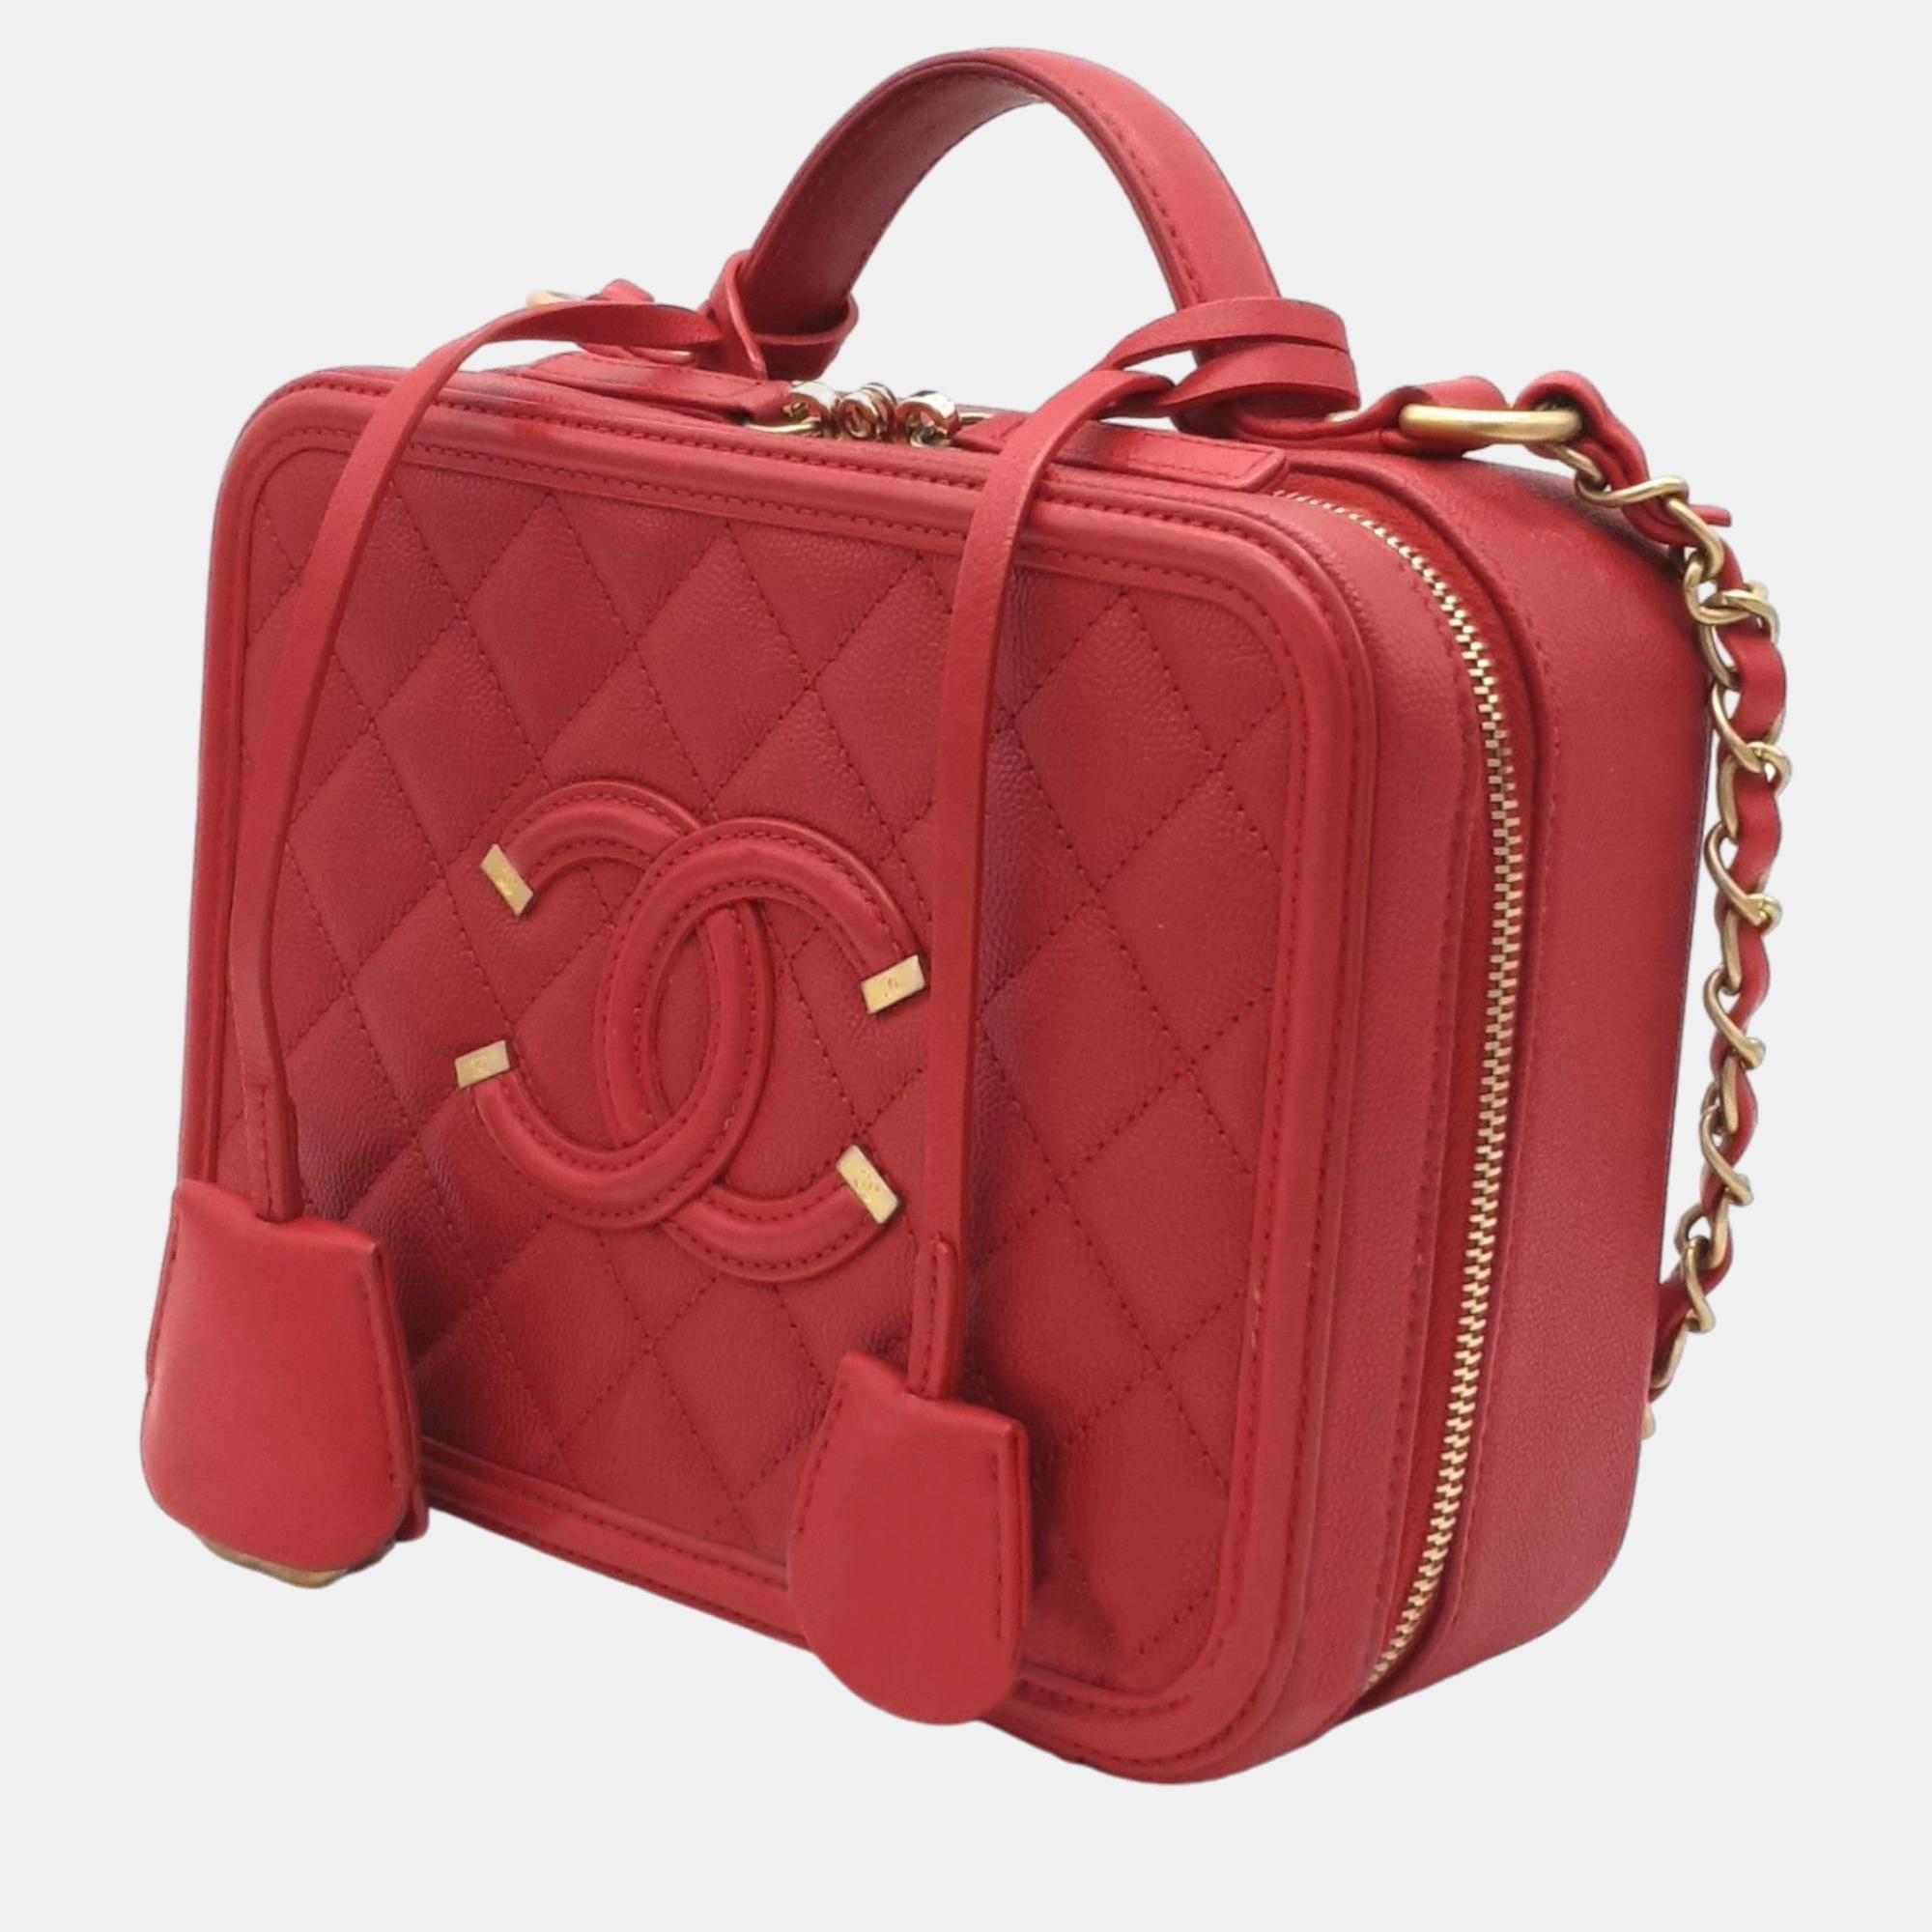 

Chanel Red Leather CC Vanity Case